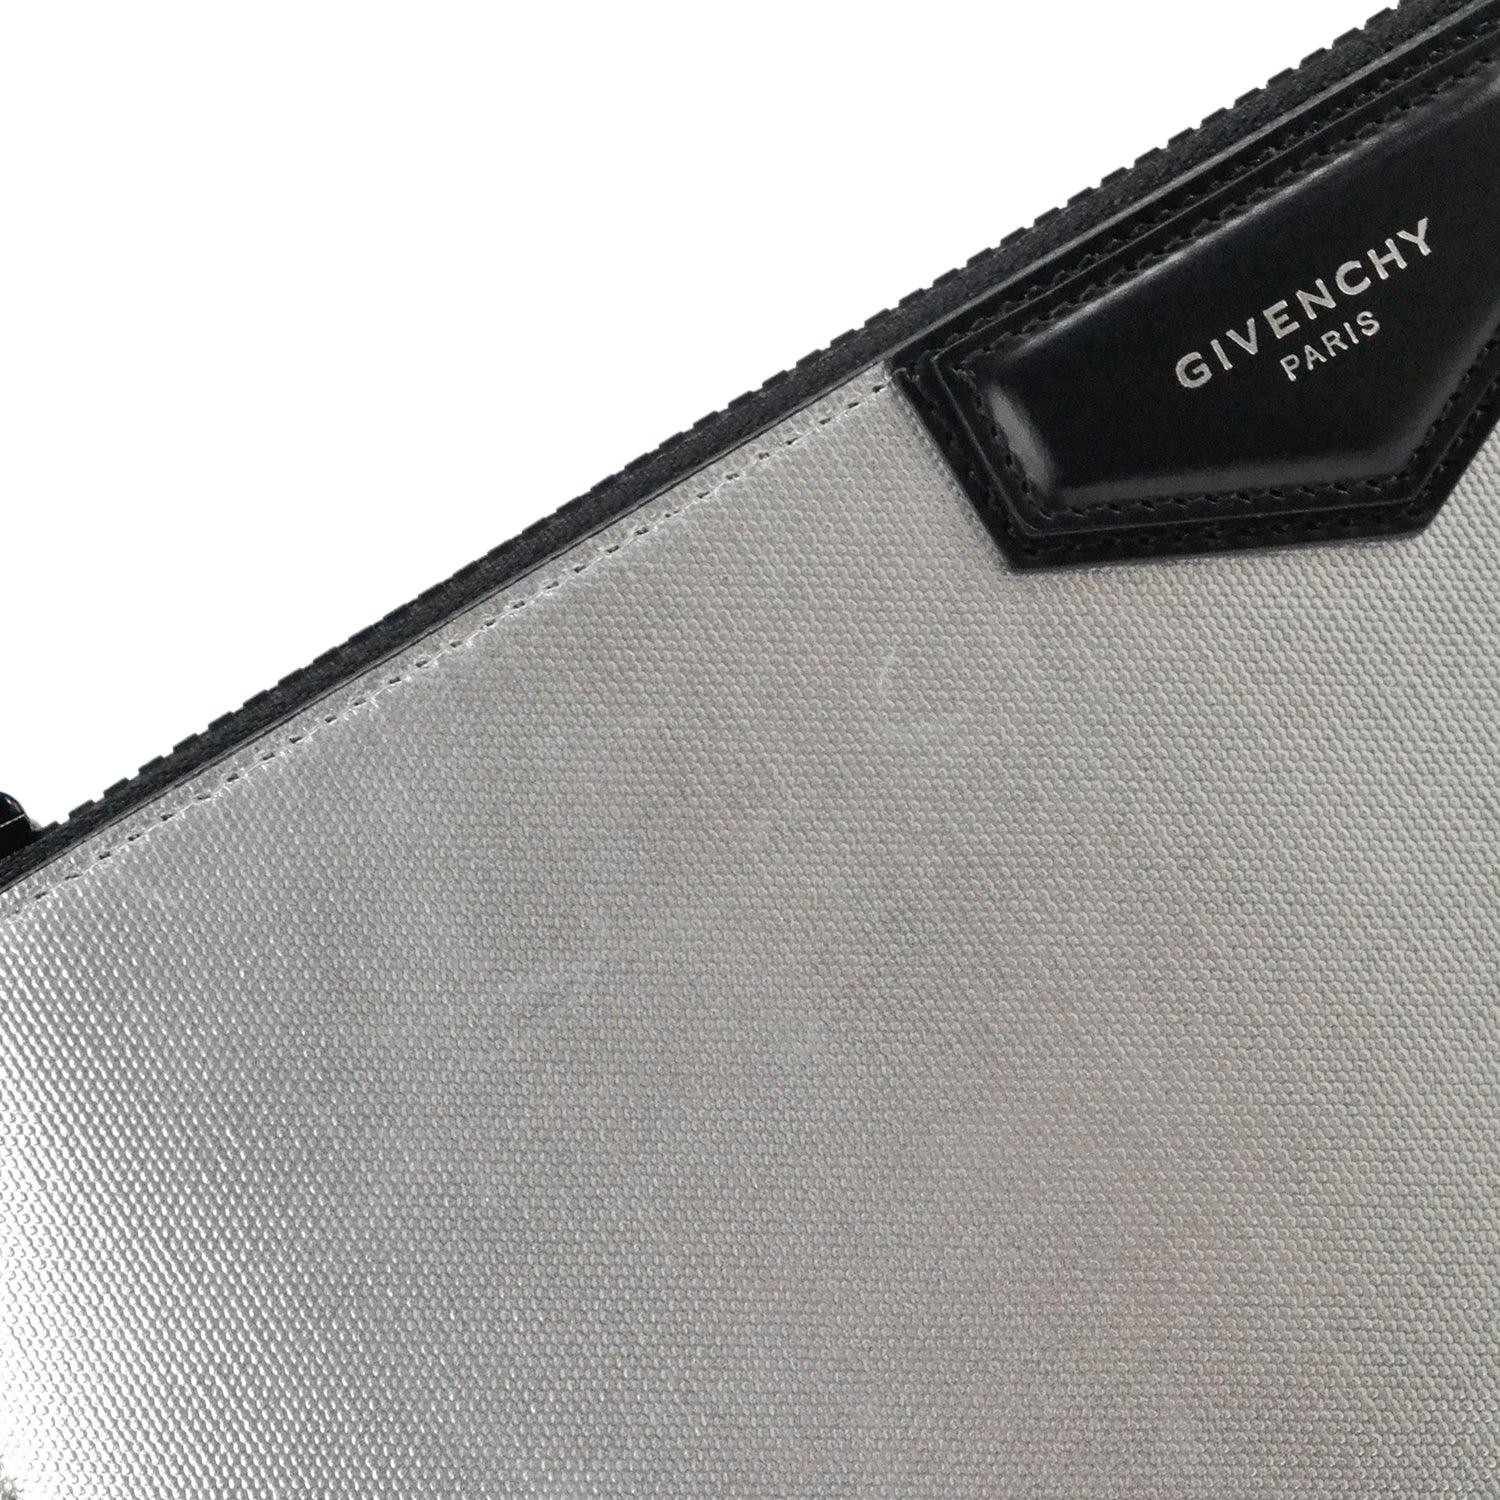 Givenchy Pouch - Fashionably Yours